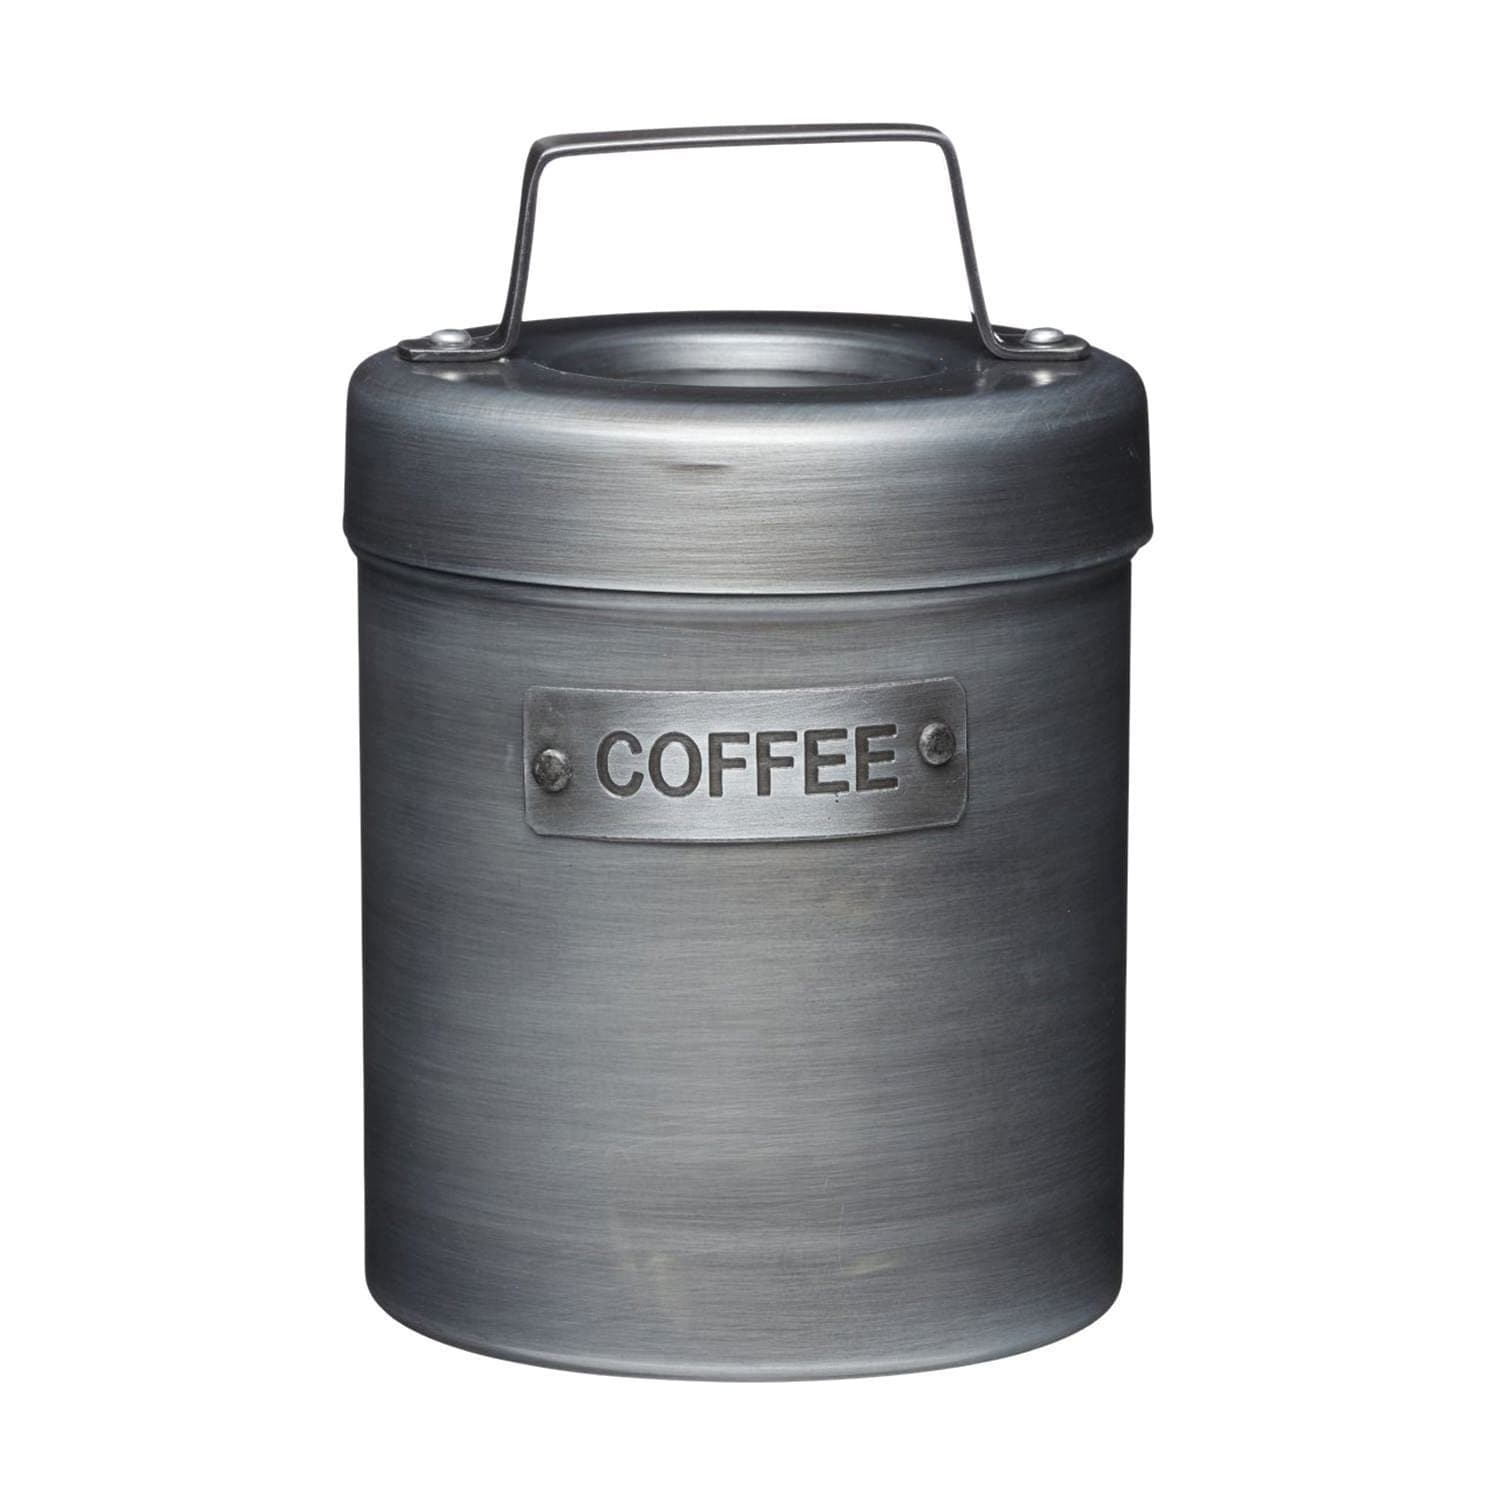 KitchenCraft Industrial Kitchen Vintage -Style Coffee Canister - Silver - INDCOFFEE - Jashanmal Home